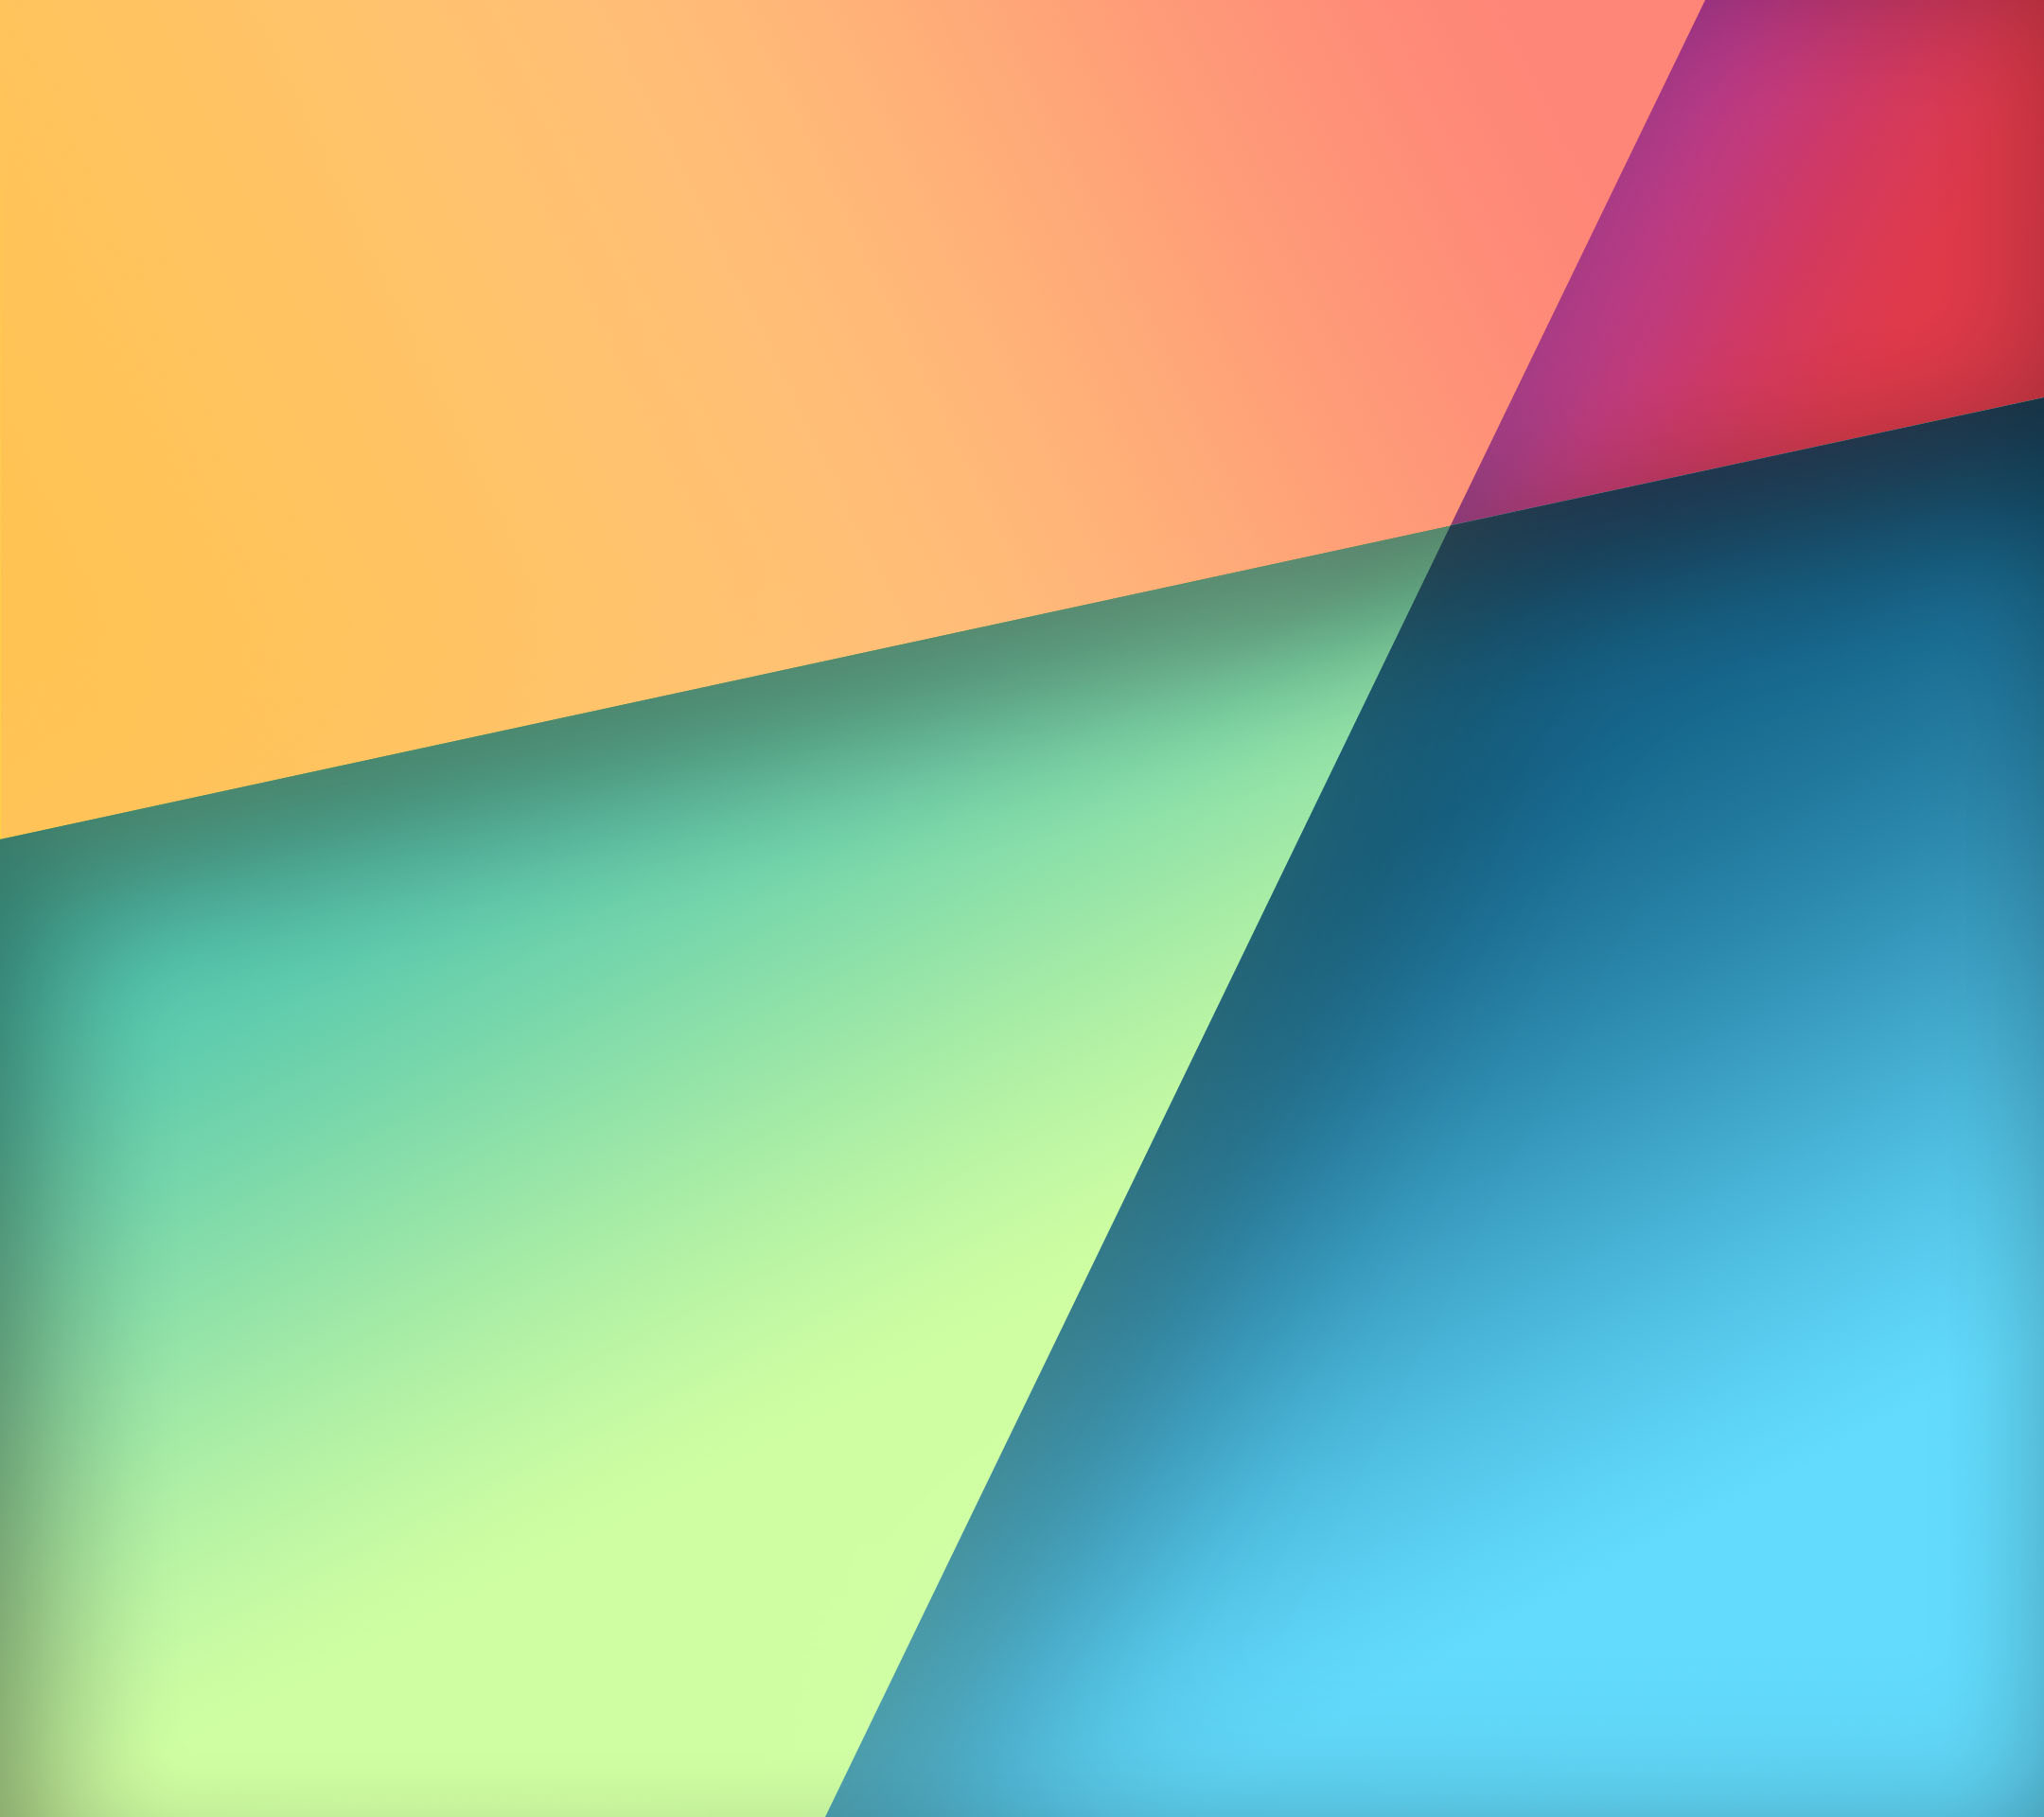 Nexus 7 Stock Wallpaper In Google Play Colors By R3conn3r On Deviantart